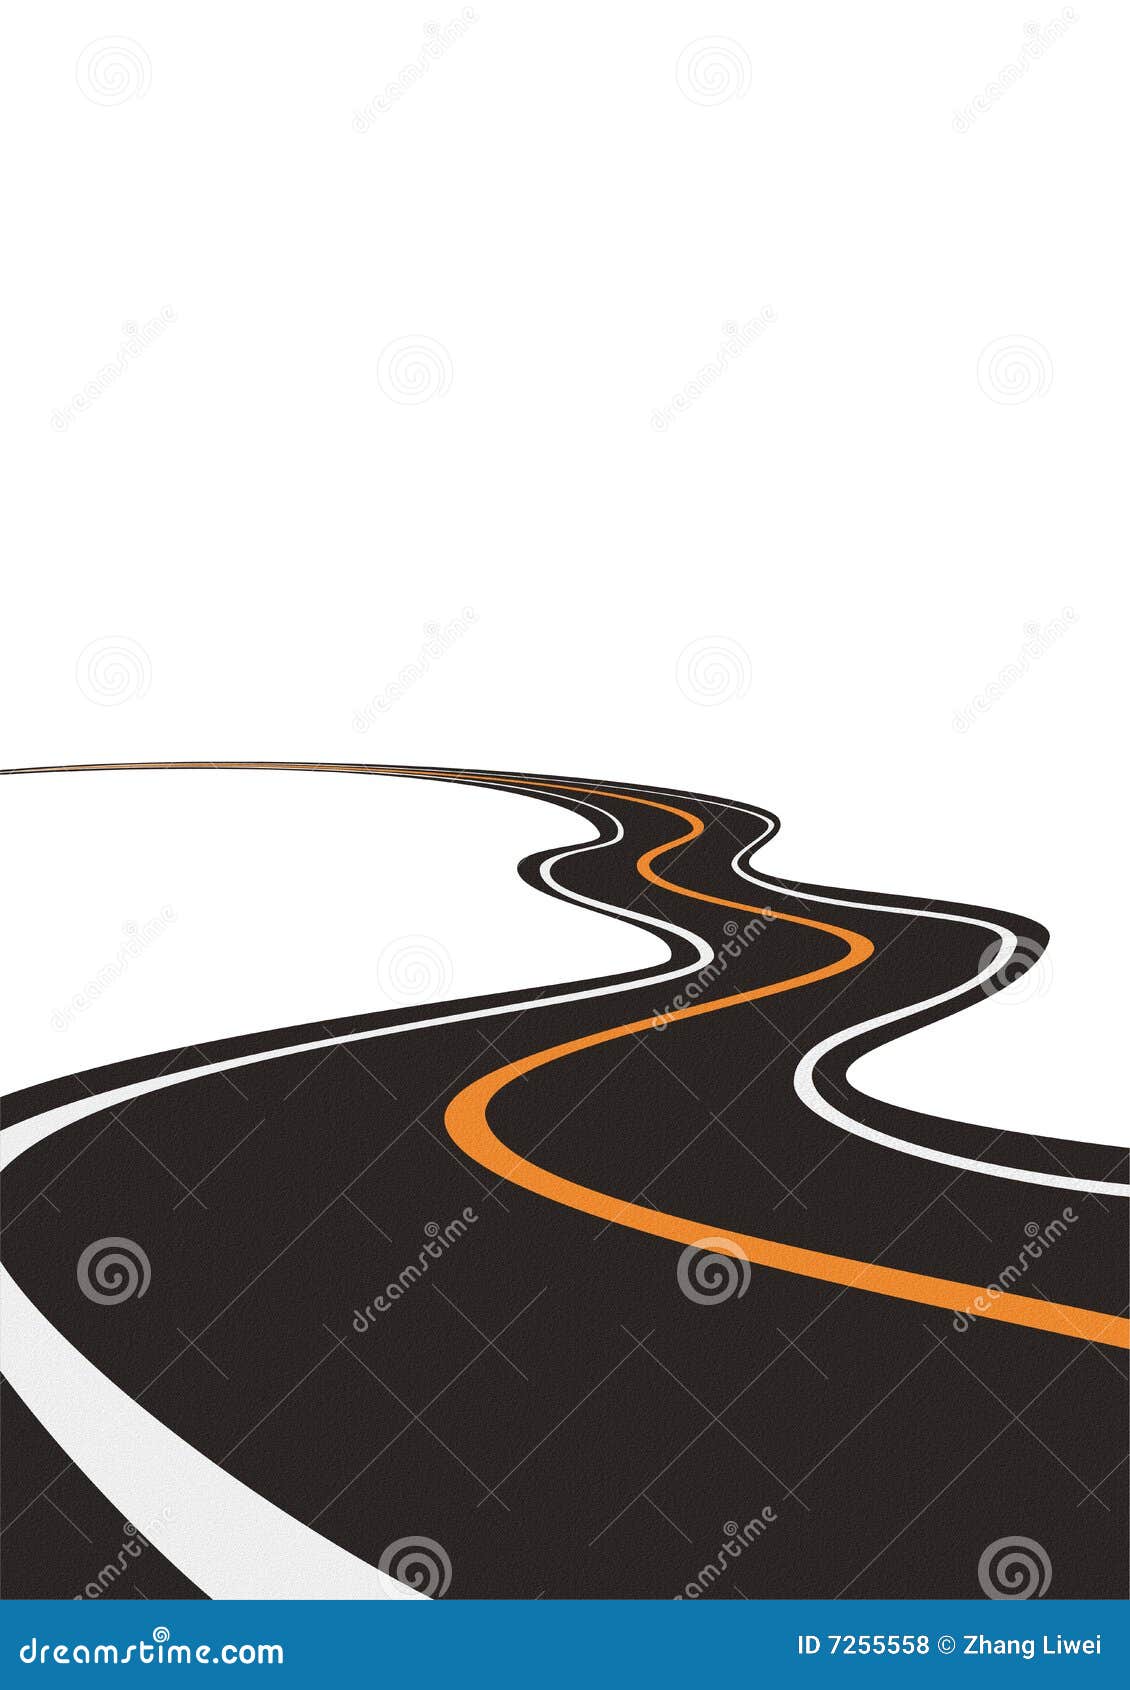 vector free download road - photo #42